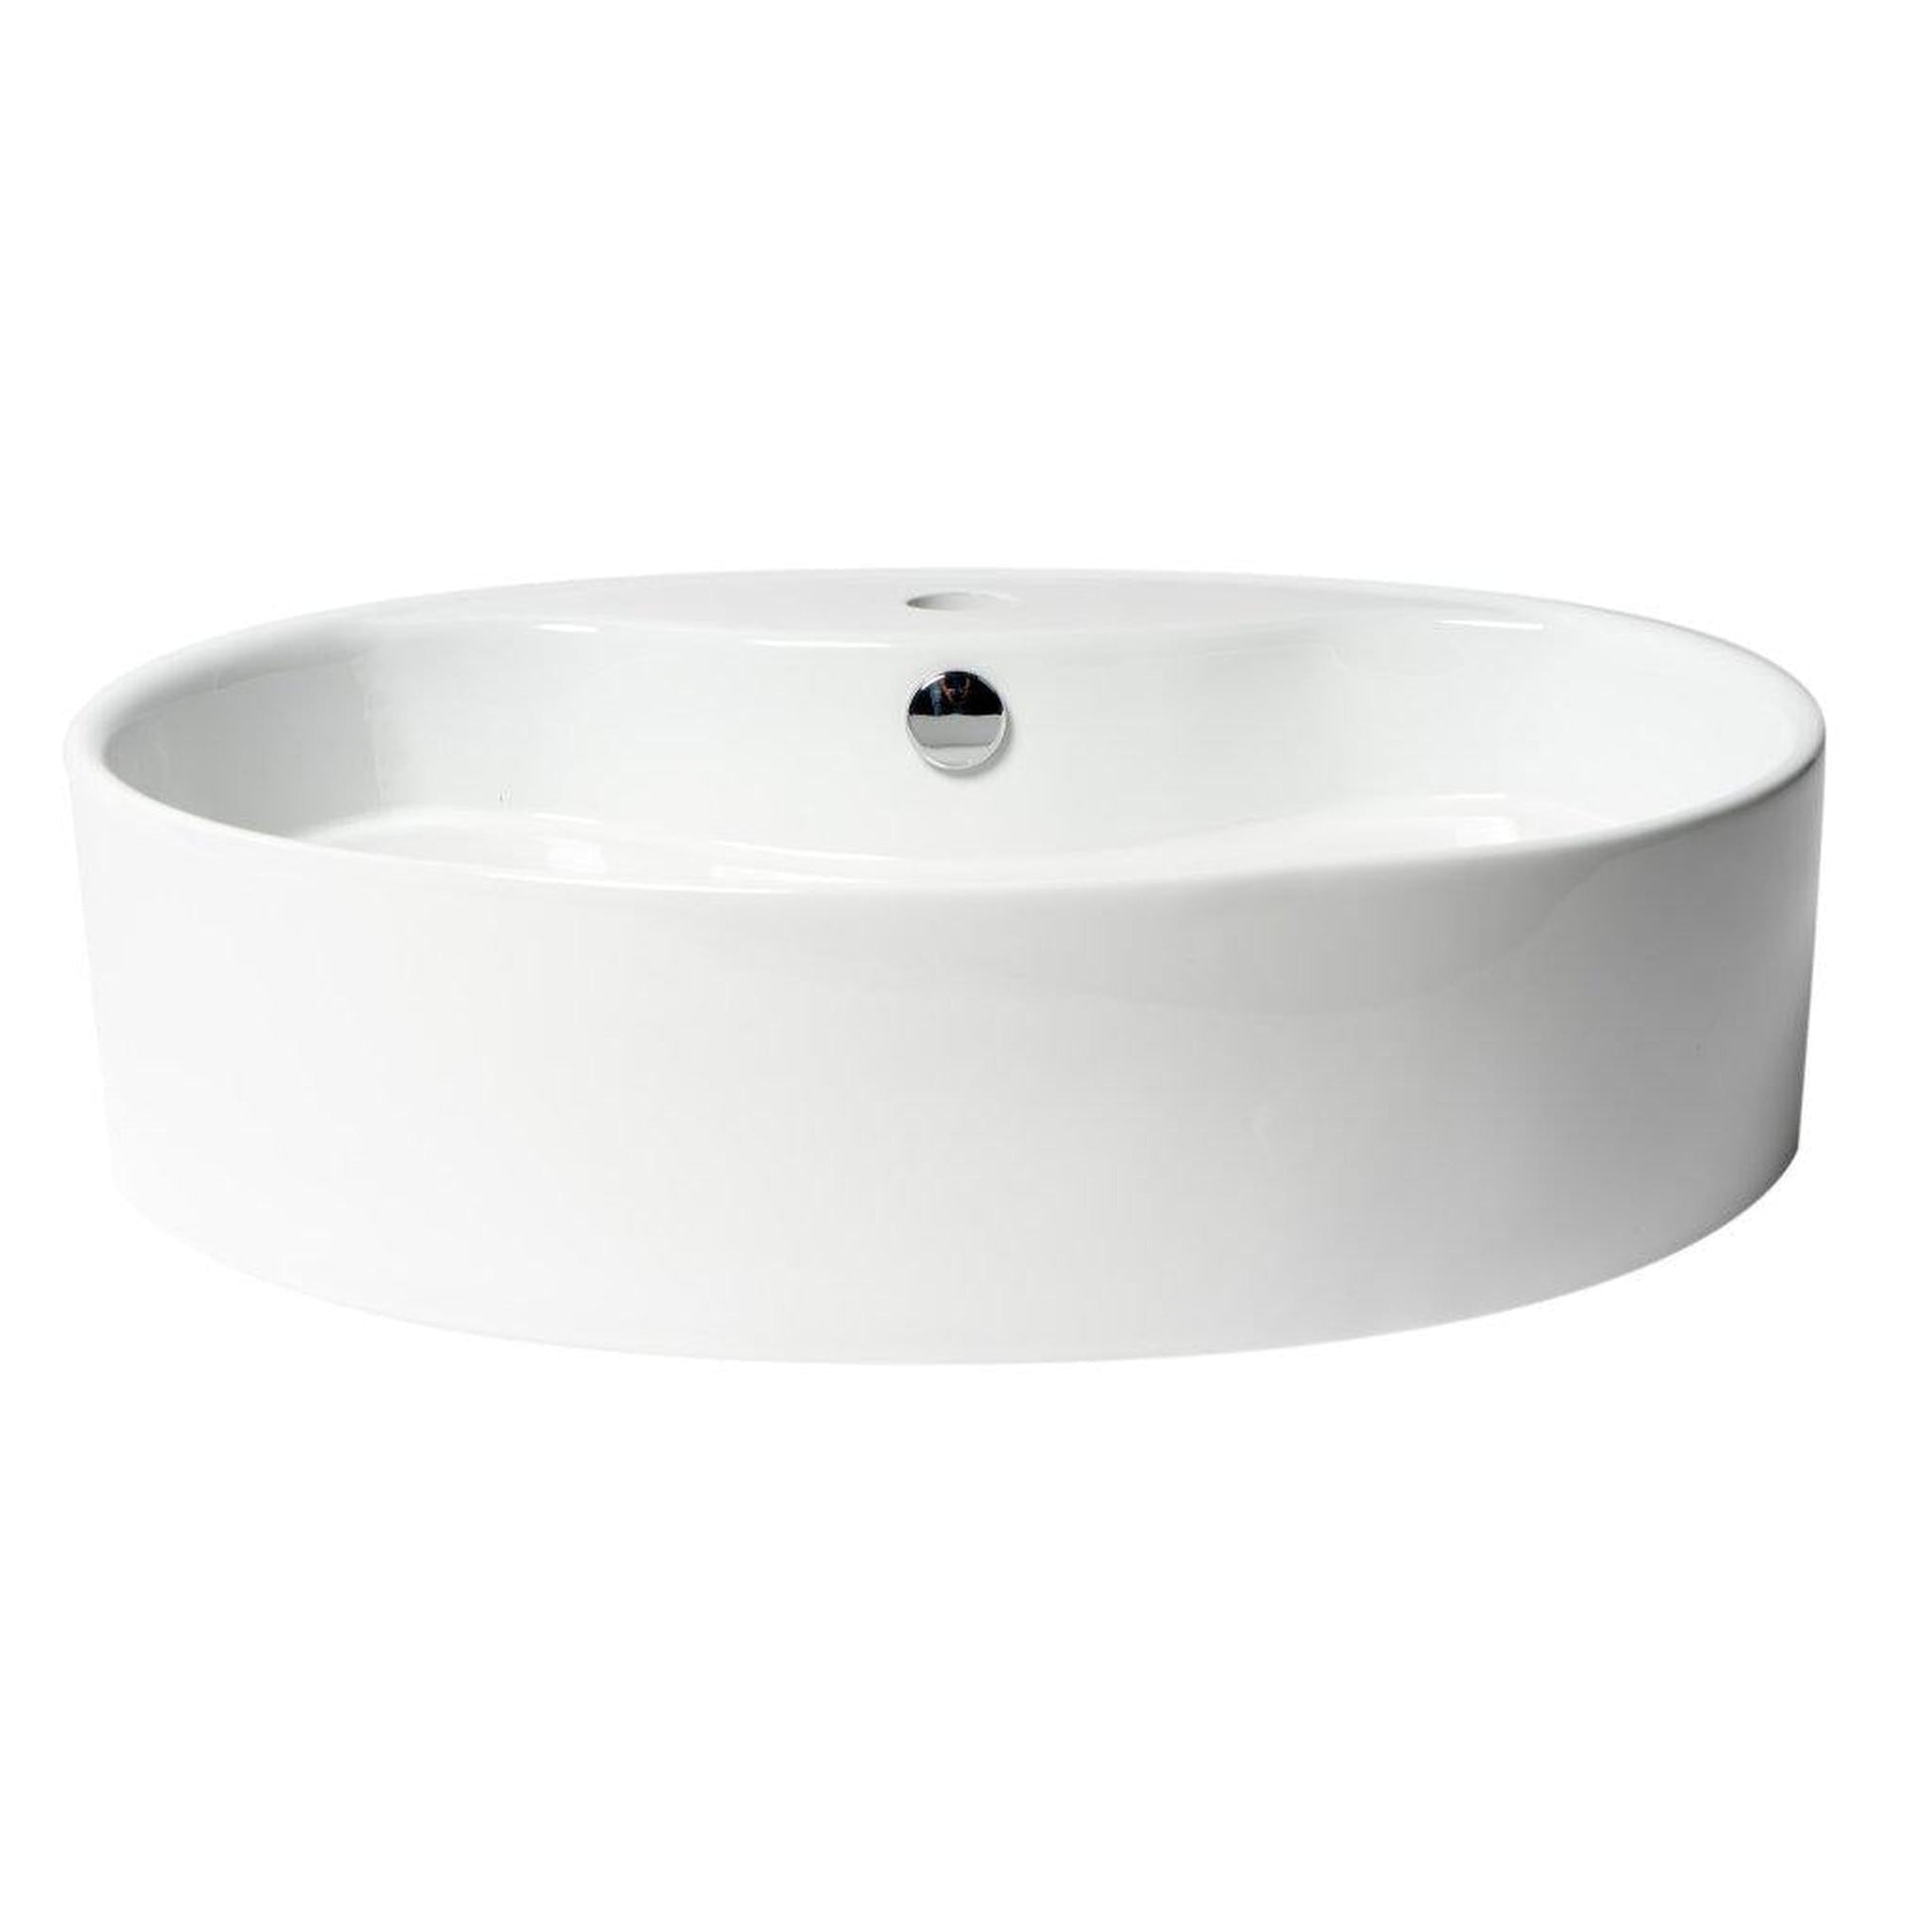 ALFI Brand ABC910 22" White Above Mount Oval Ceramic Bathroom Sink With Single Faucet Hole and Overflow